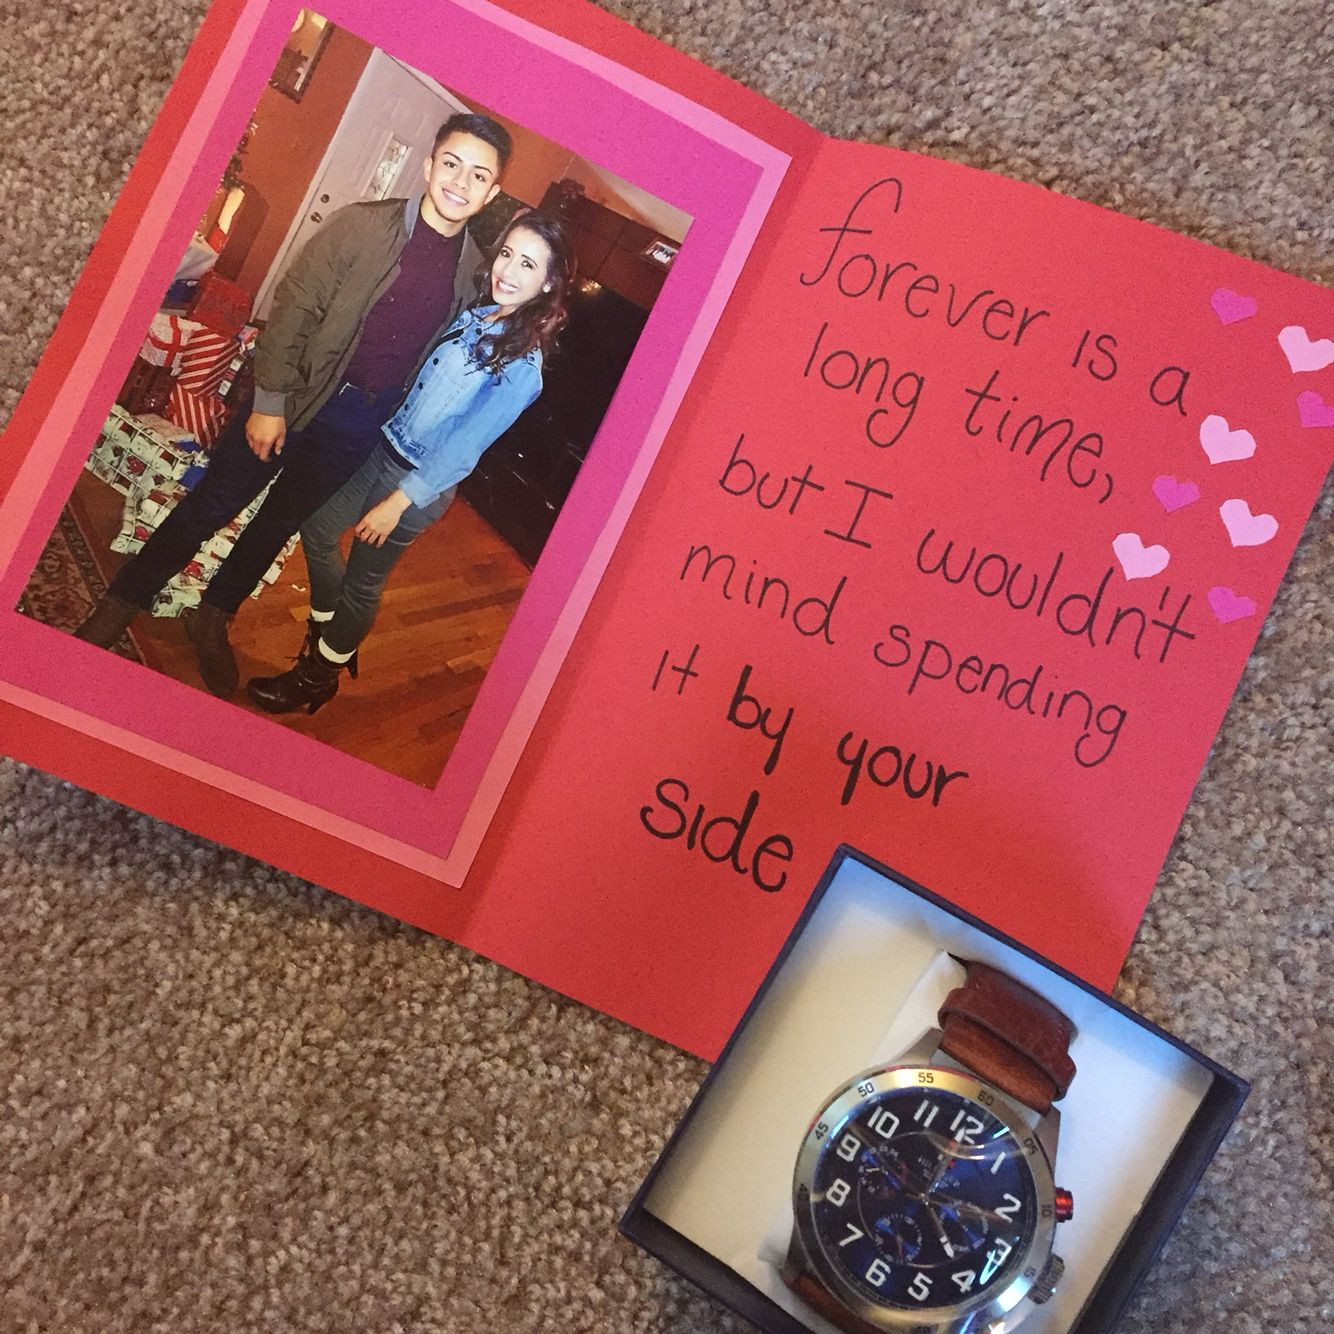 25 Of The Best Ideas For Valentine Day Gift Ideas For Your Boyfriend Home Family Style And 